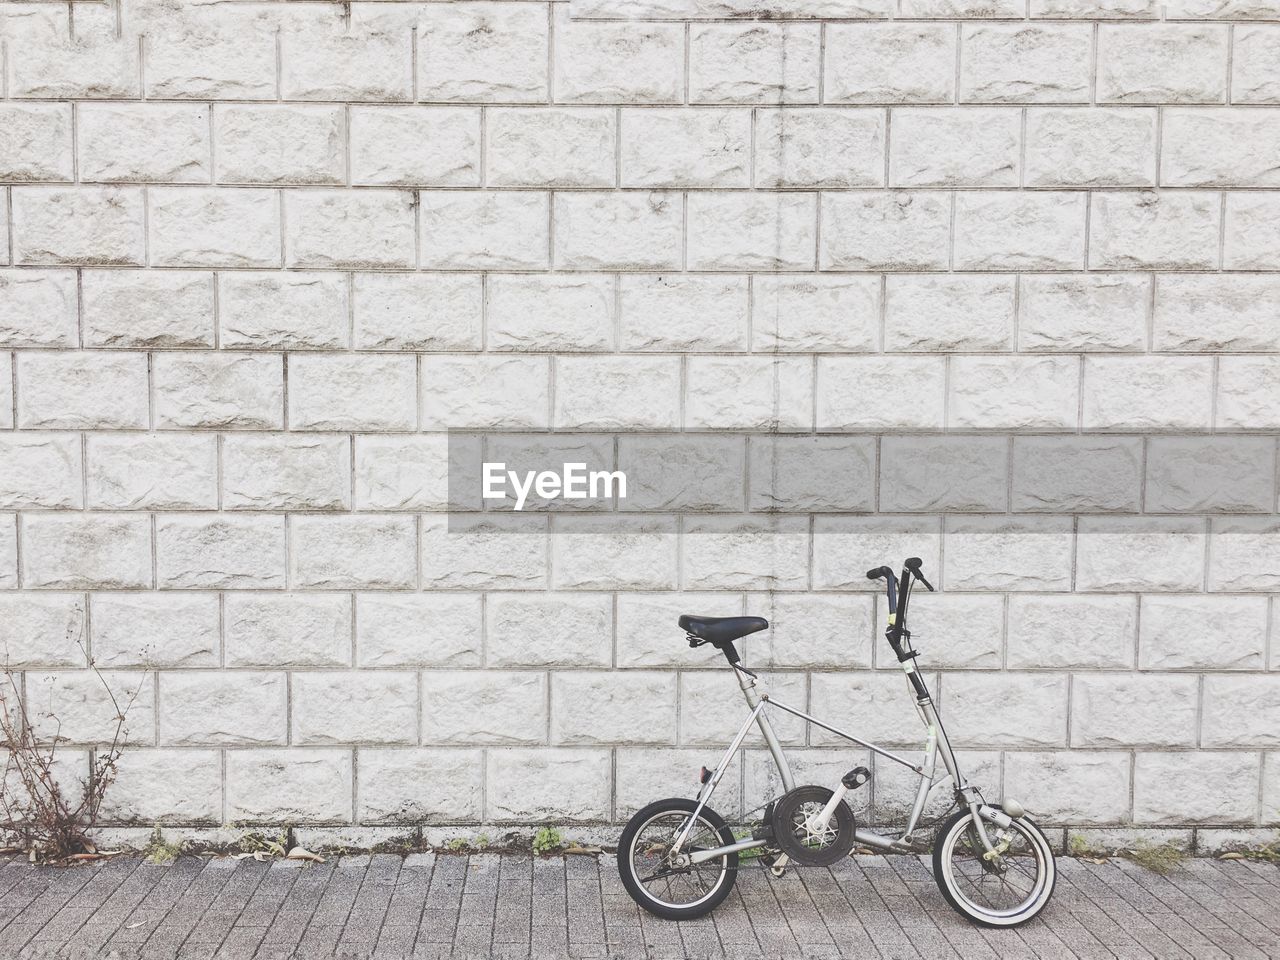 BICYCLE PARKED ON WALL